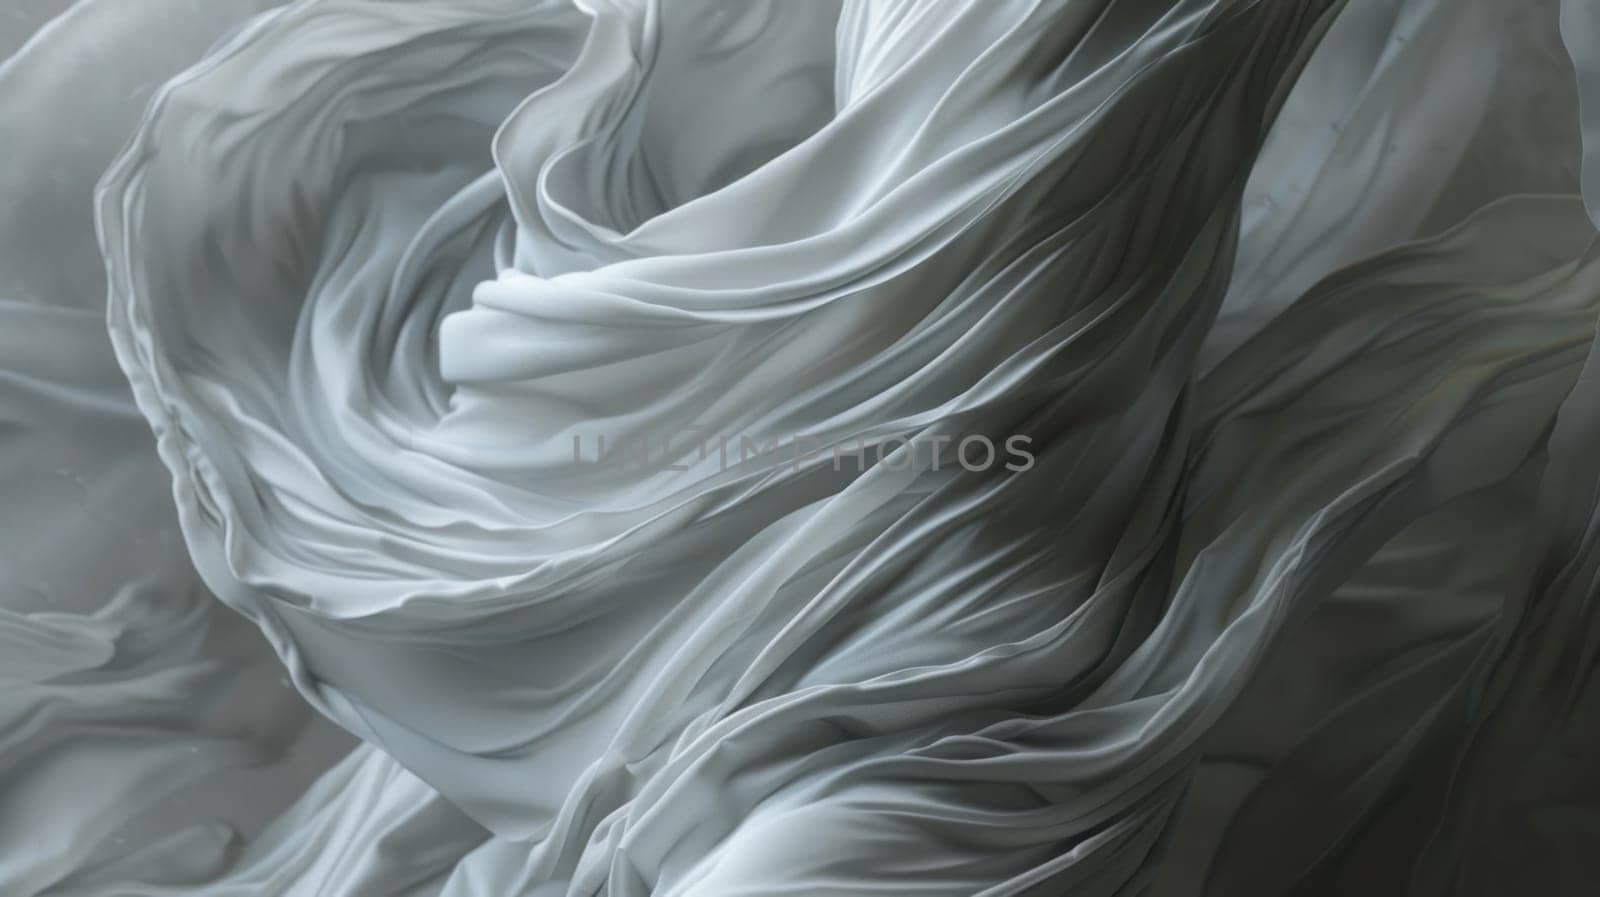 Close-up of crumpled white fabric creating abstract patterns and textures.